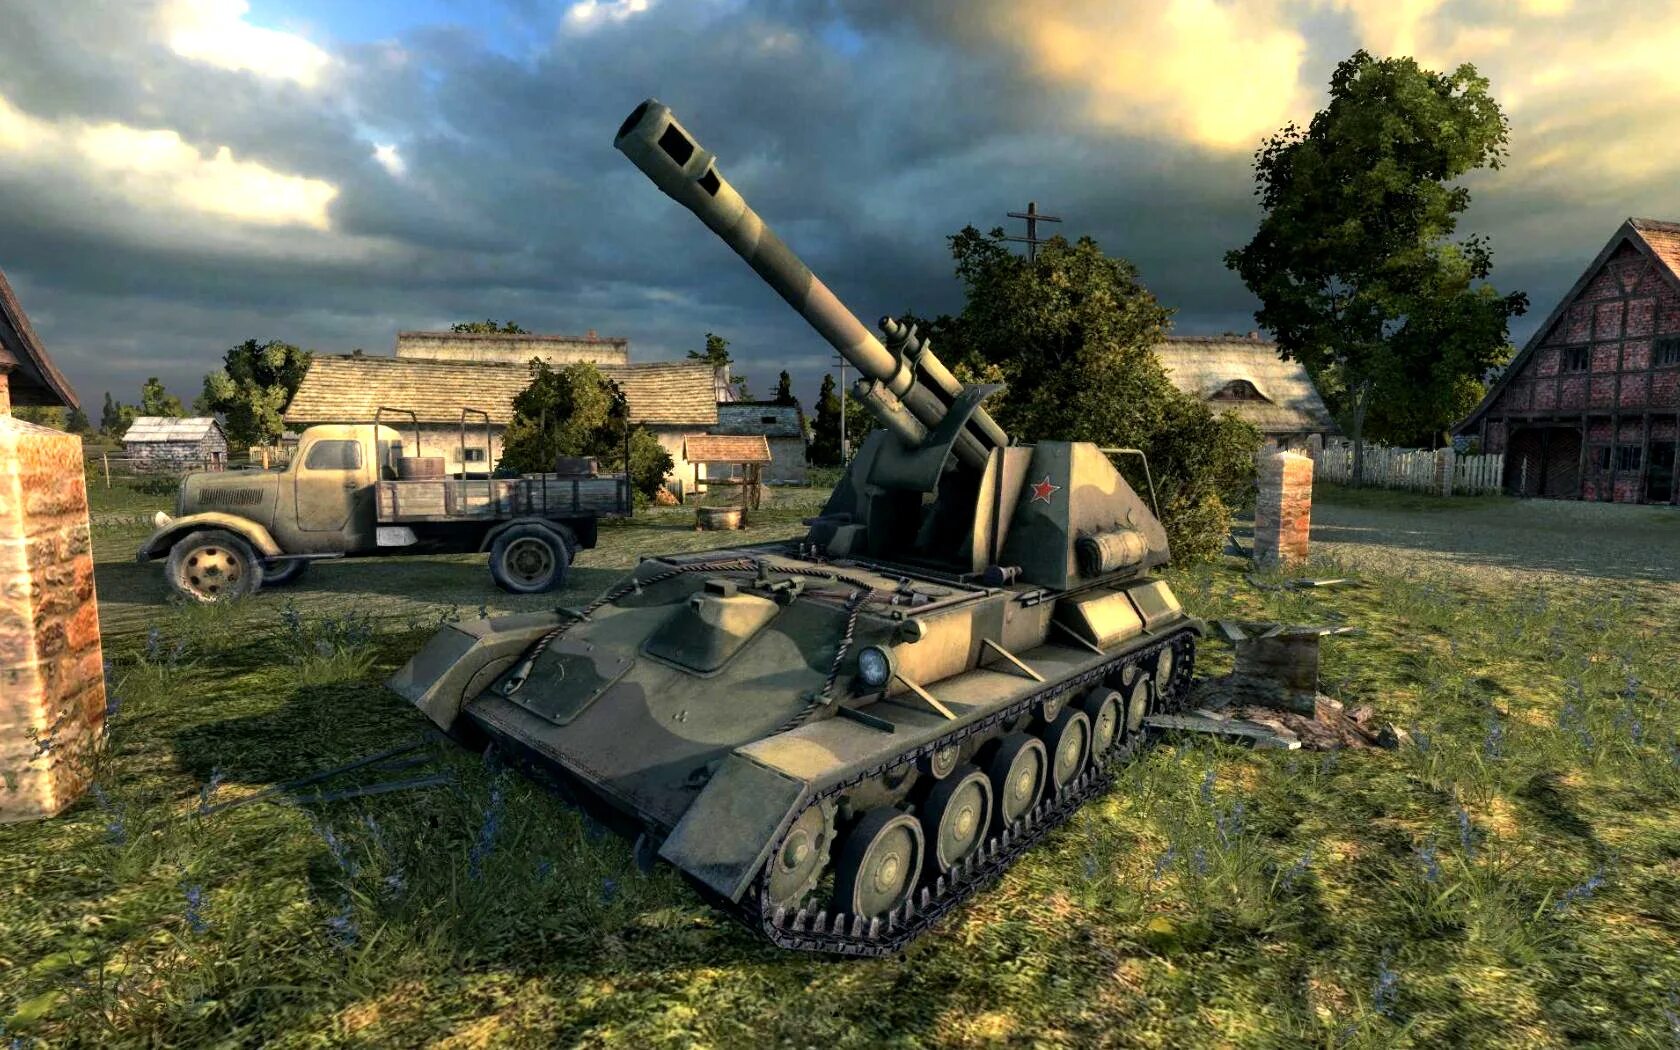 Wot from wit. Танк Су-122а World of Tanks. Су 122 WOT. Арта танк в World of Tanks. Су-8 в World of Tanks.